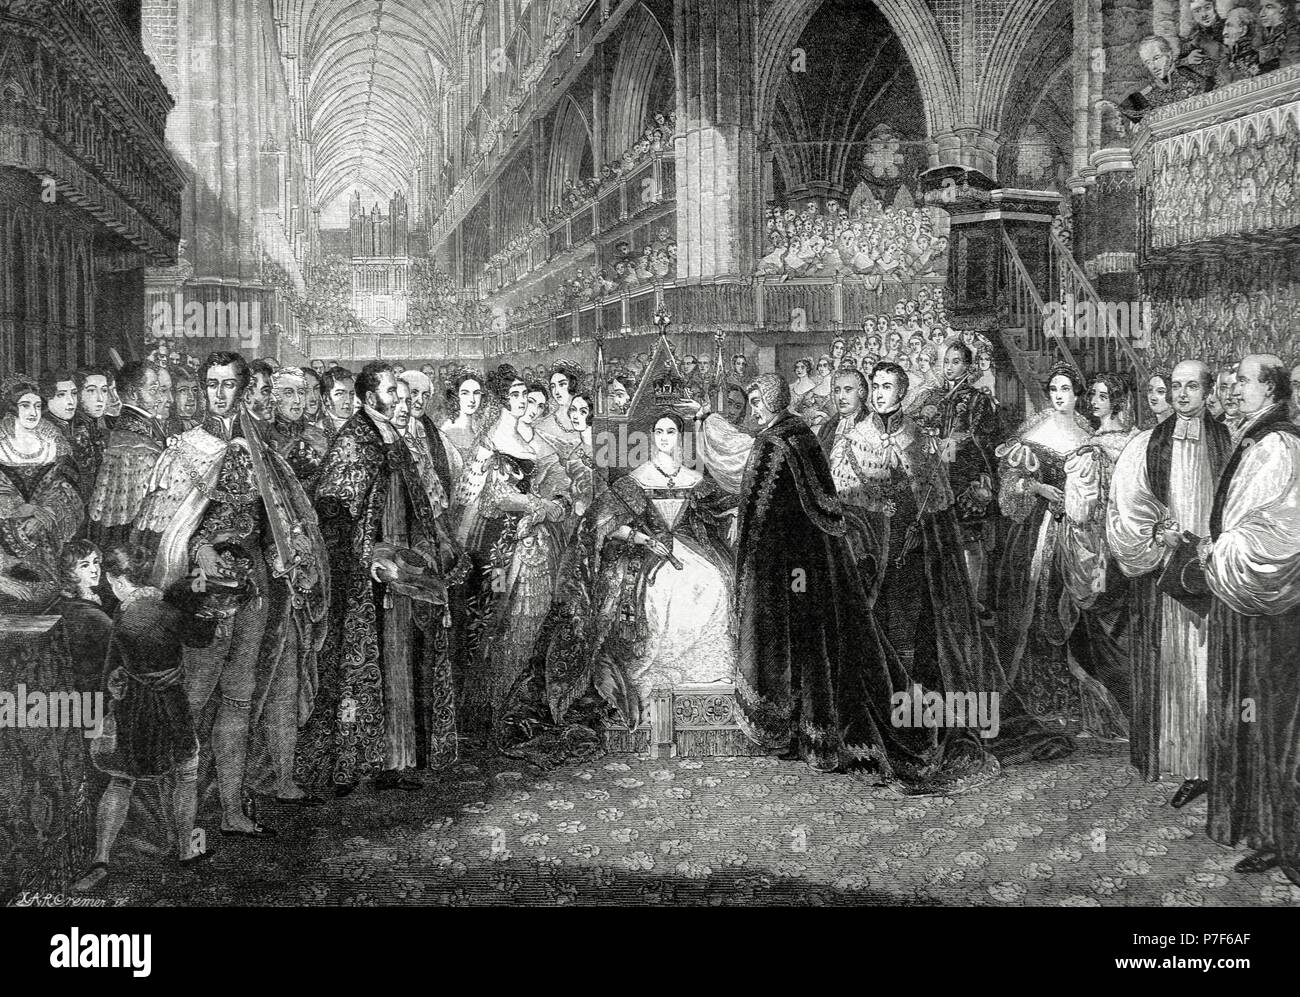 Victoria I (1819-1901). Queen of the United Kingdom of Great Britain and Ireland (1837-1901). Coronation of Victoria as a Queen, 28 June 1838, in the Westminster Abbey. Engraving by E. Cremer after a painting of E. T. Parris. 'Nuestro Siglo' , 19th century. Stock Photo